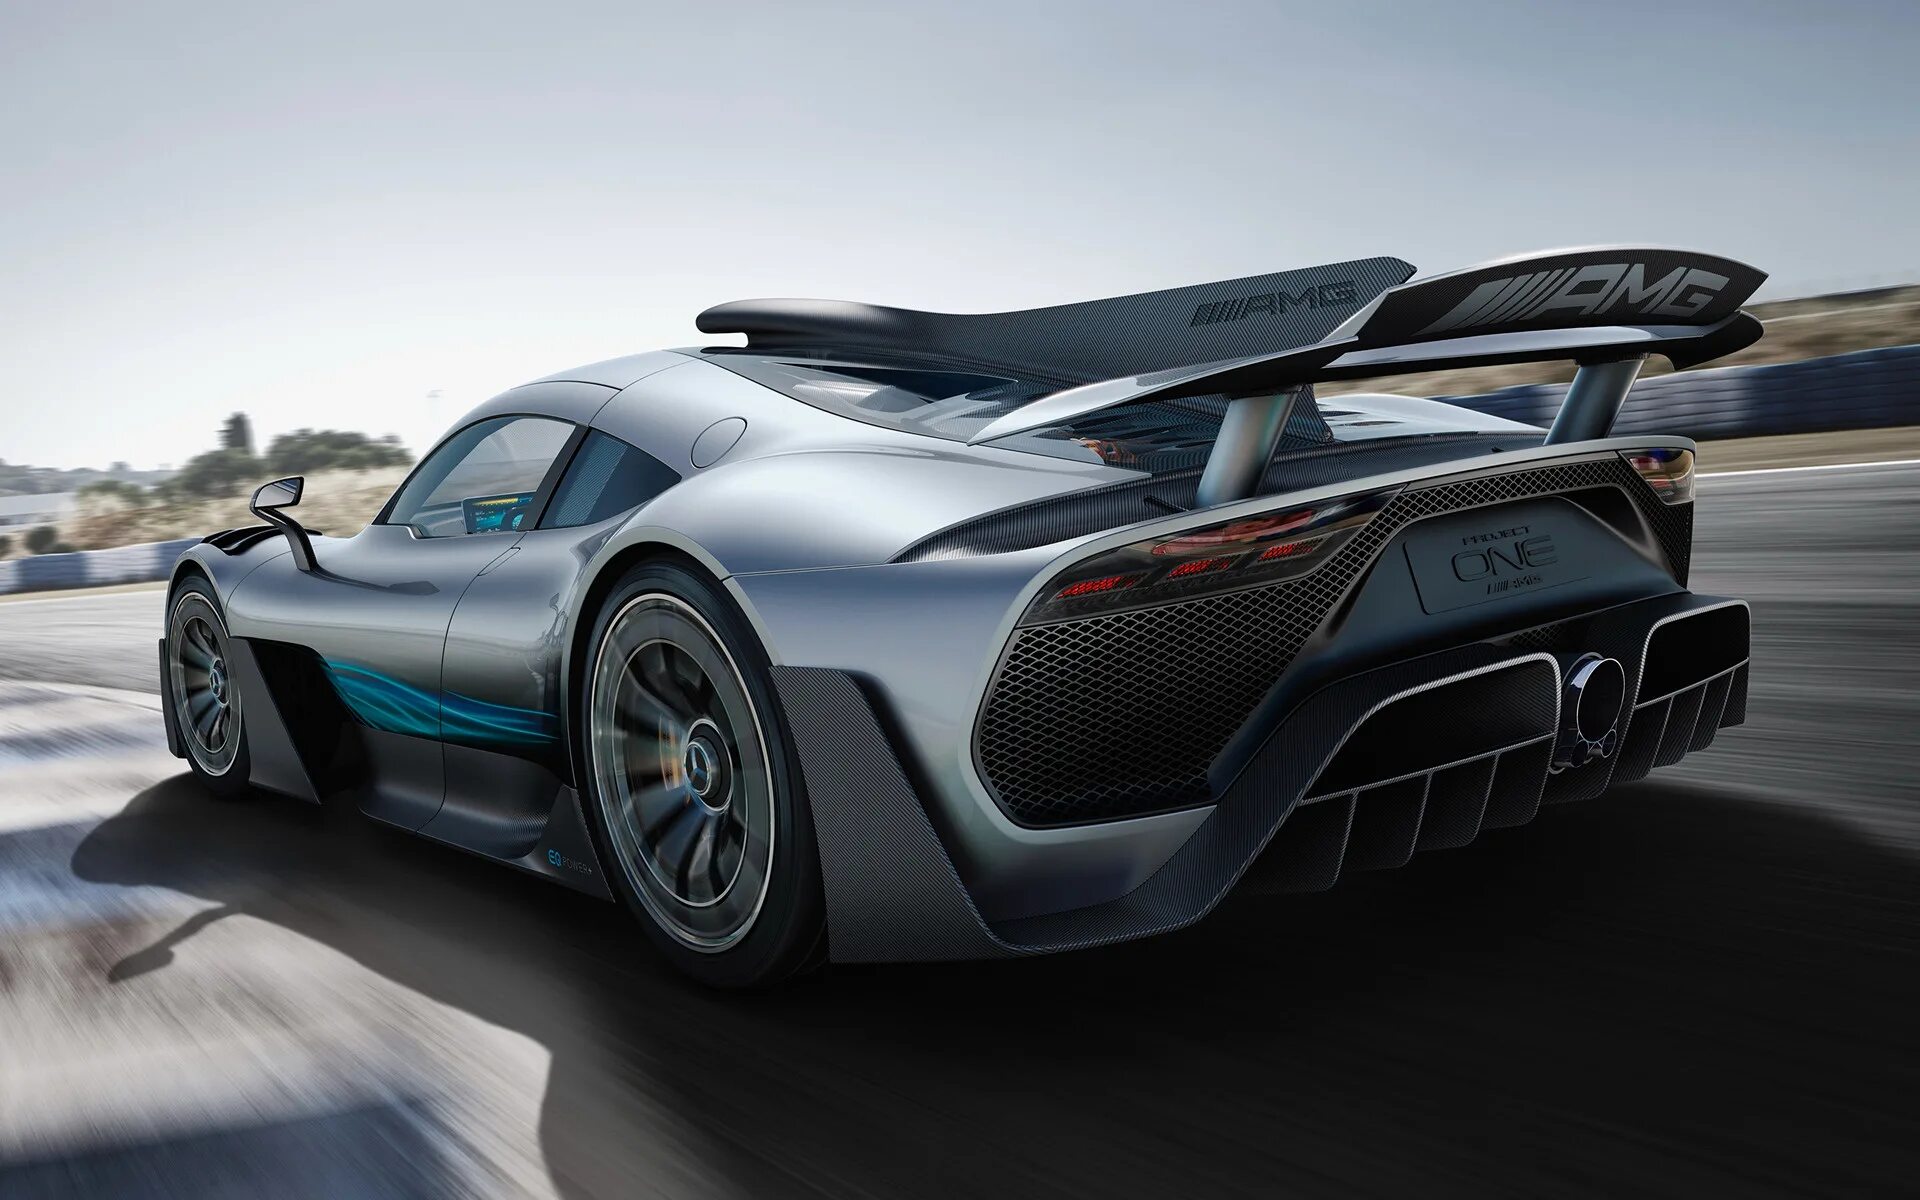 Mercedes AMG one 2021. Мерседес гиперкар. Гиперкар Мерседес AMG. Mercedes Benz AMG one. Project 1.2